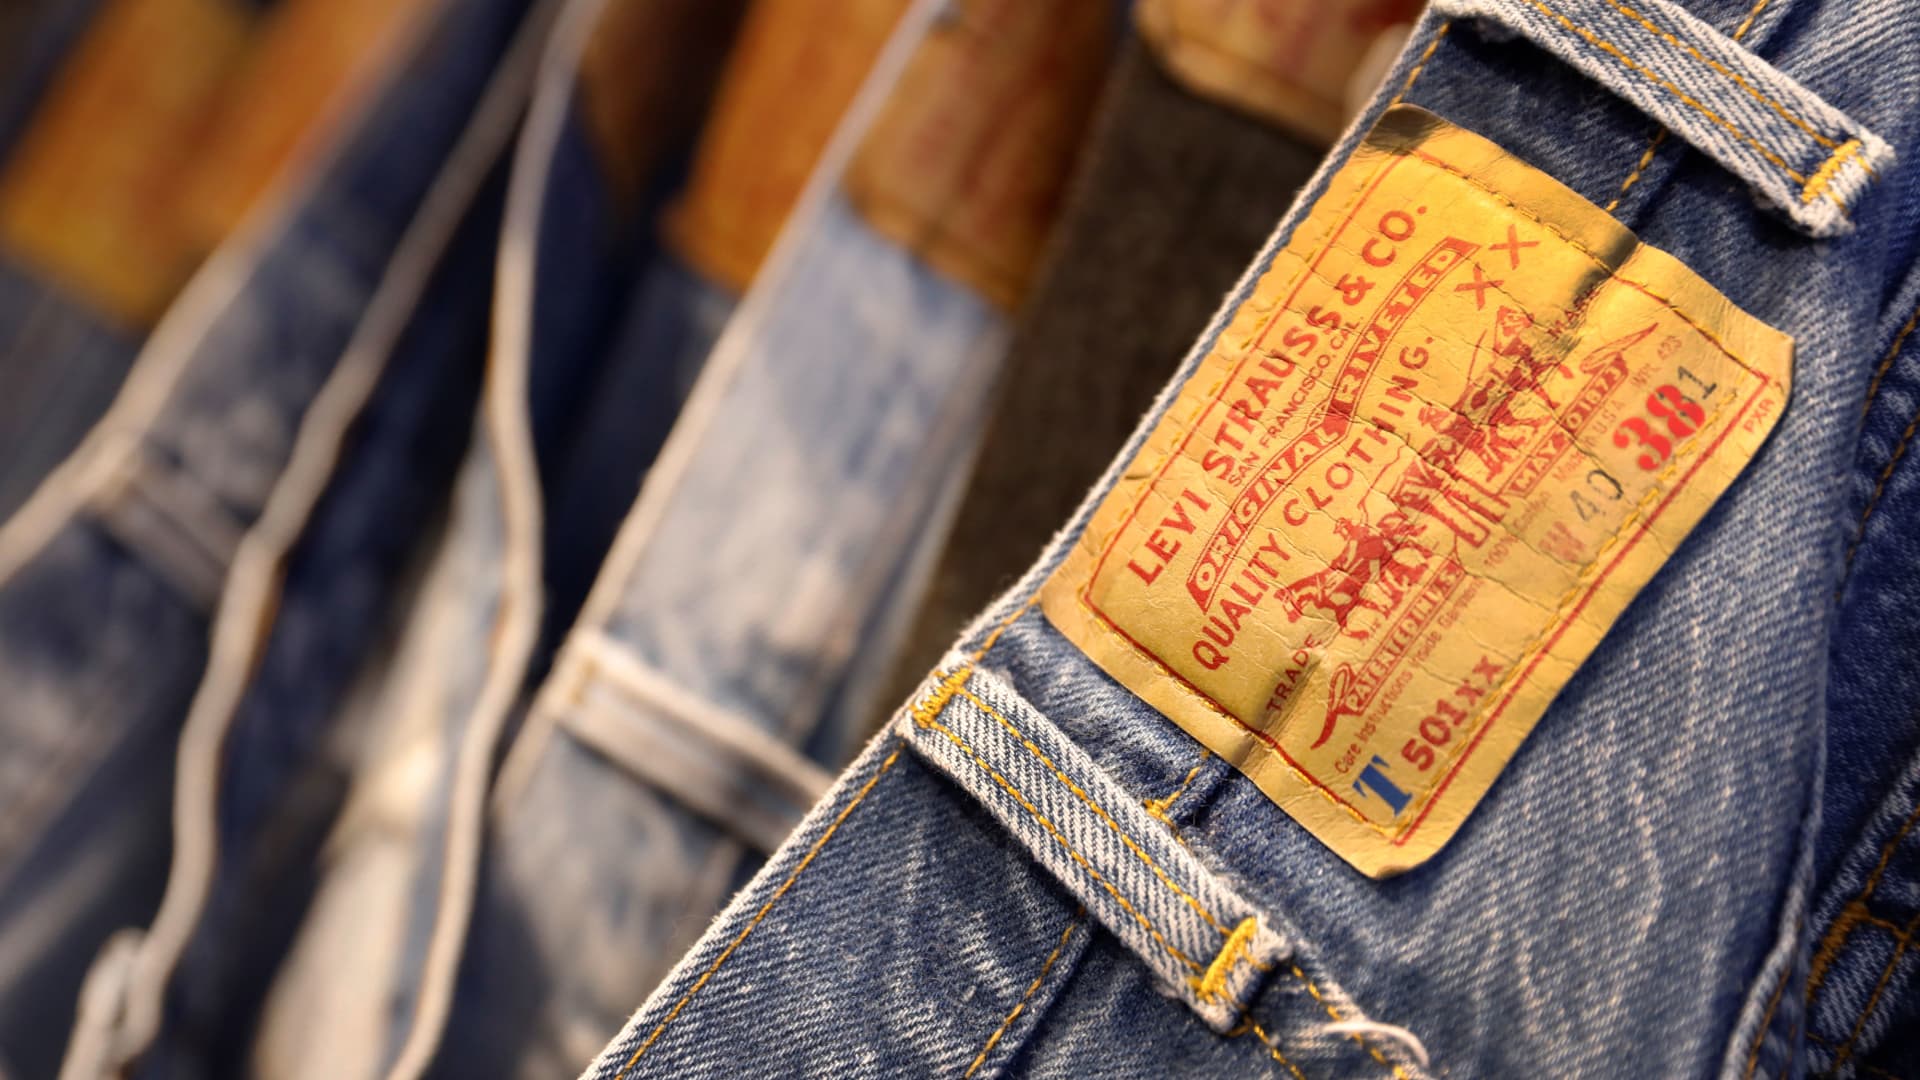 Levi Strauss CEO Chip Bergh on taking big risks with the jeans brand